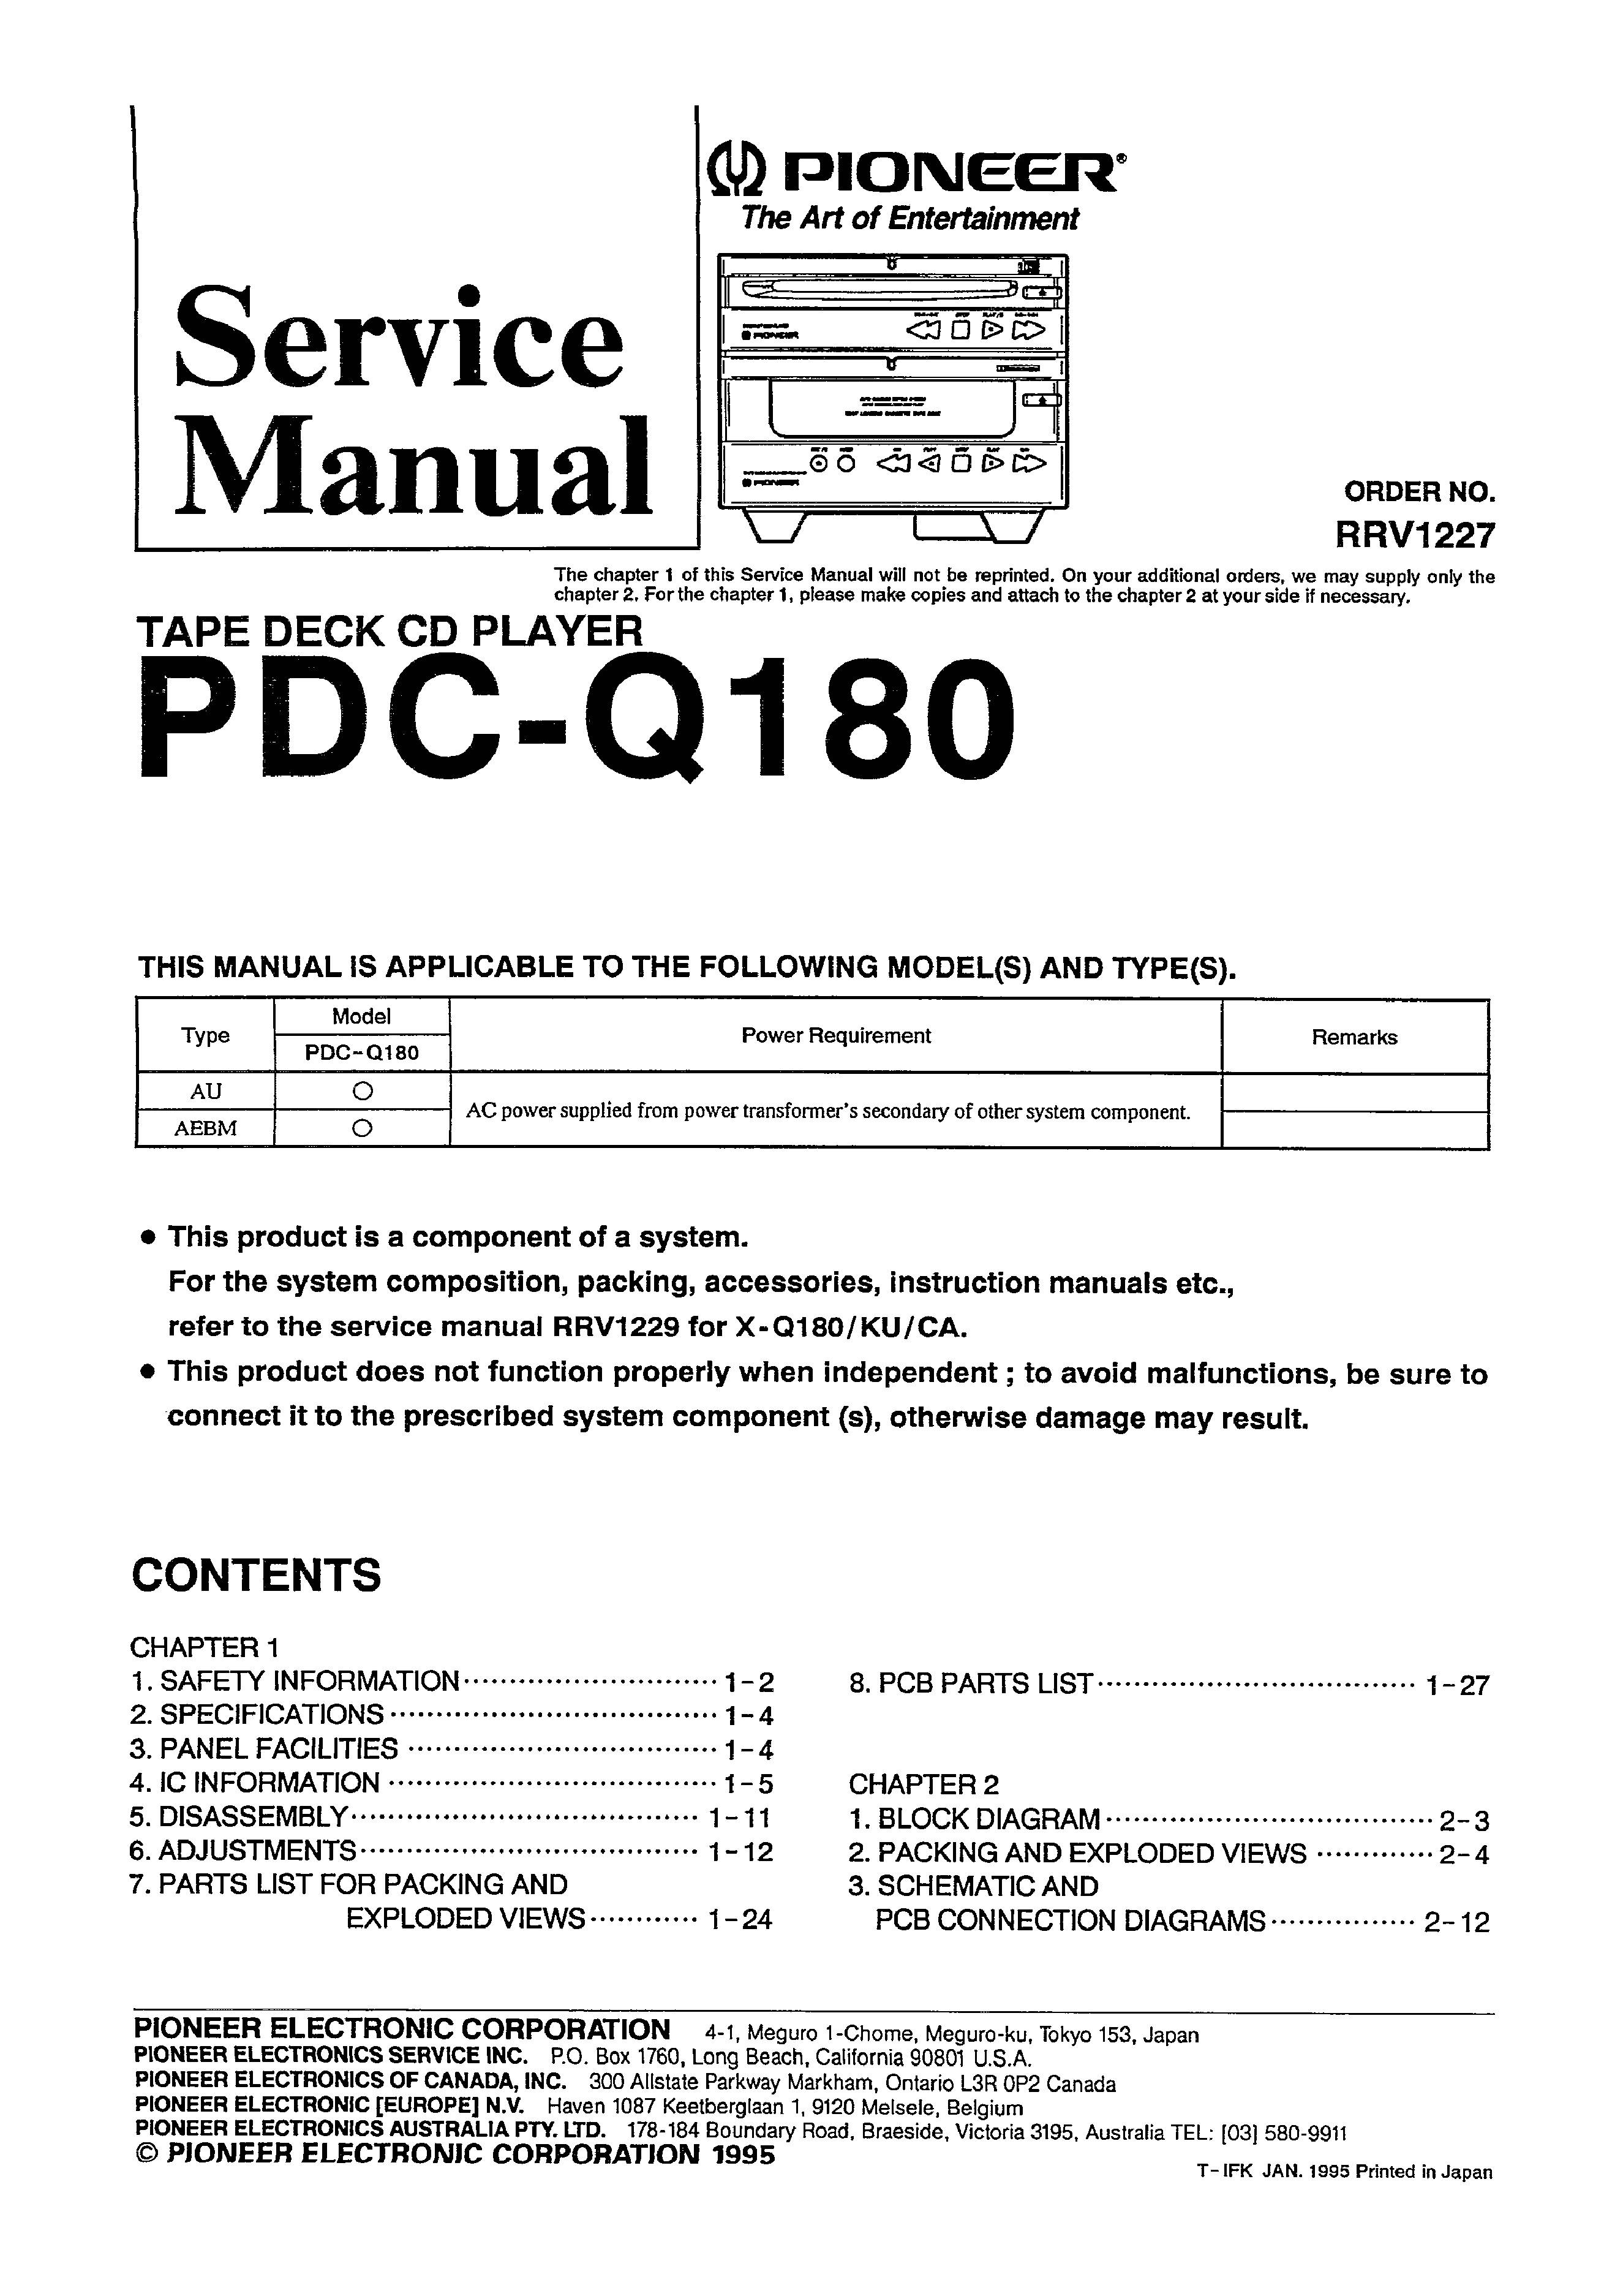 Pioneer PDC-Q180